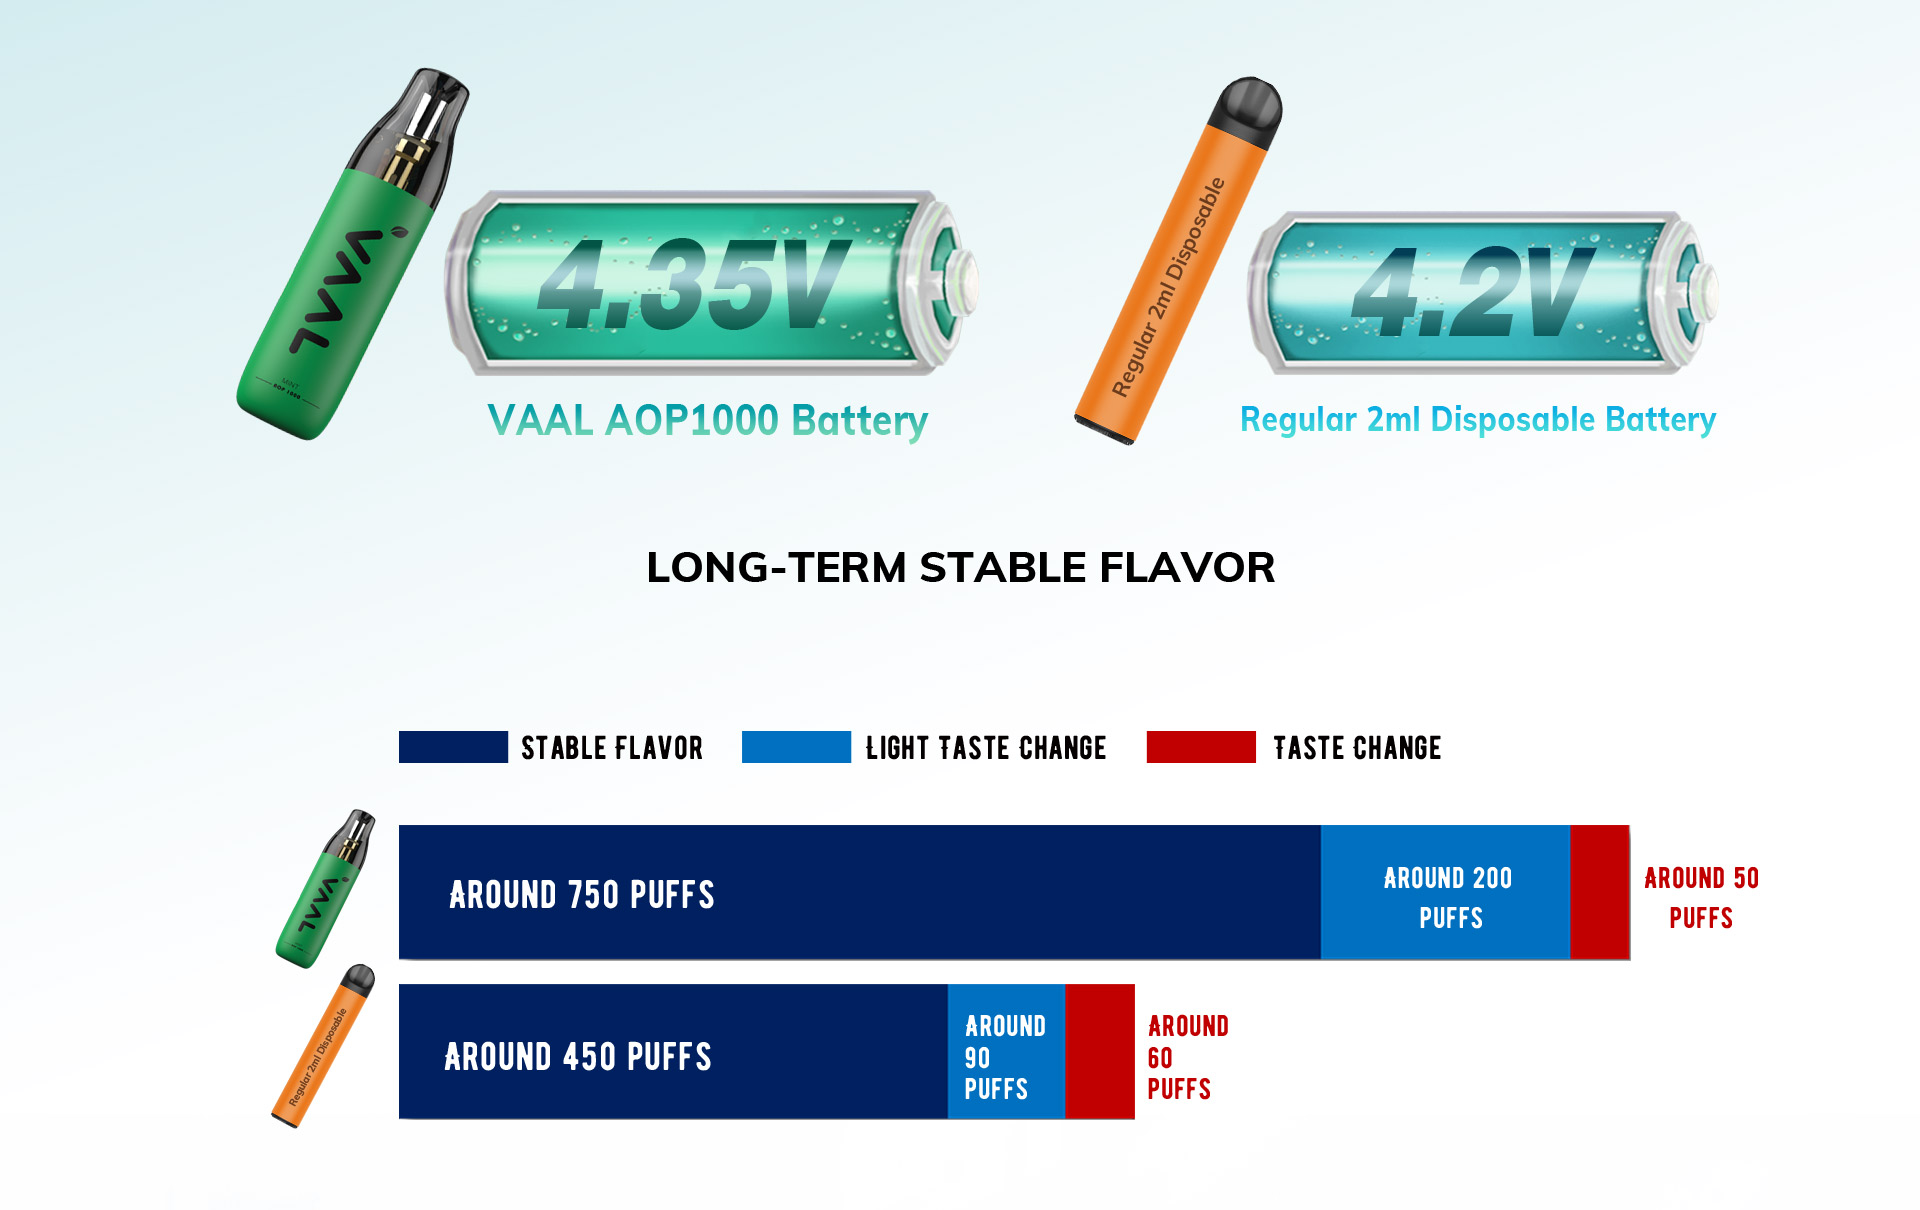 Equipped with a 4.35 voltage battery which matches e-juice well, the AOP device can last much longer with a stable and scrumptious taste than the regular 2ml disposable vape.